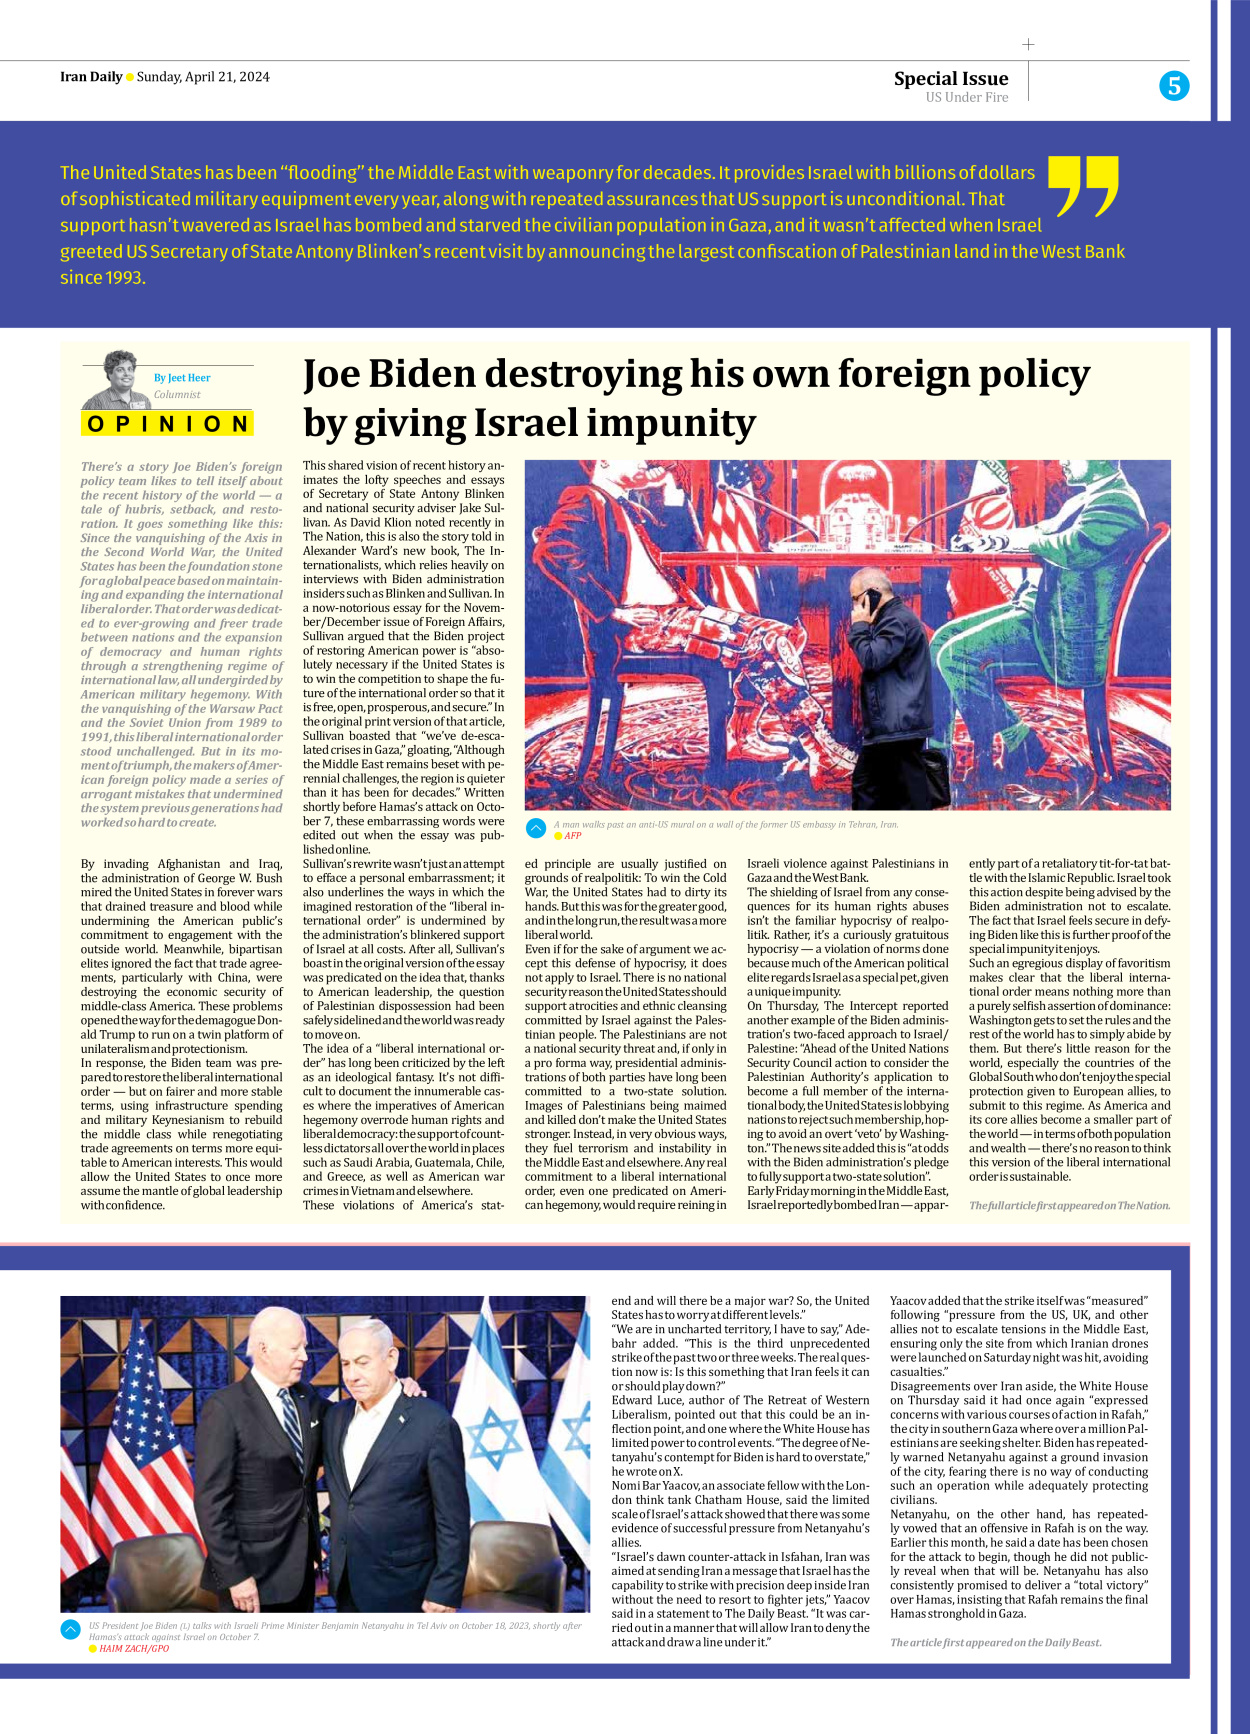 Iran Daily - Number Seven Thousand Five Hundred and Thirty Eight - 21 April 2024 - Page 5